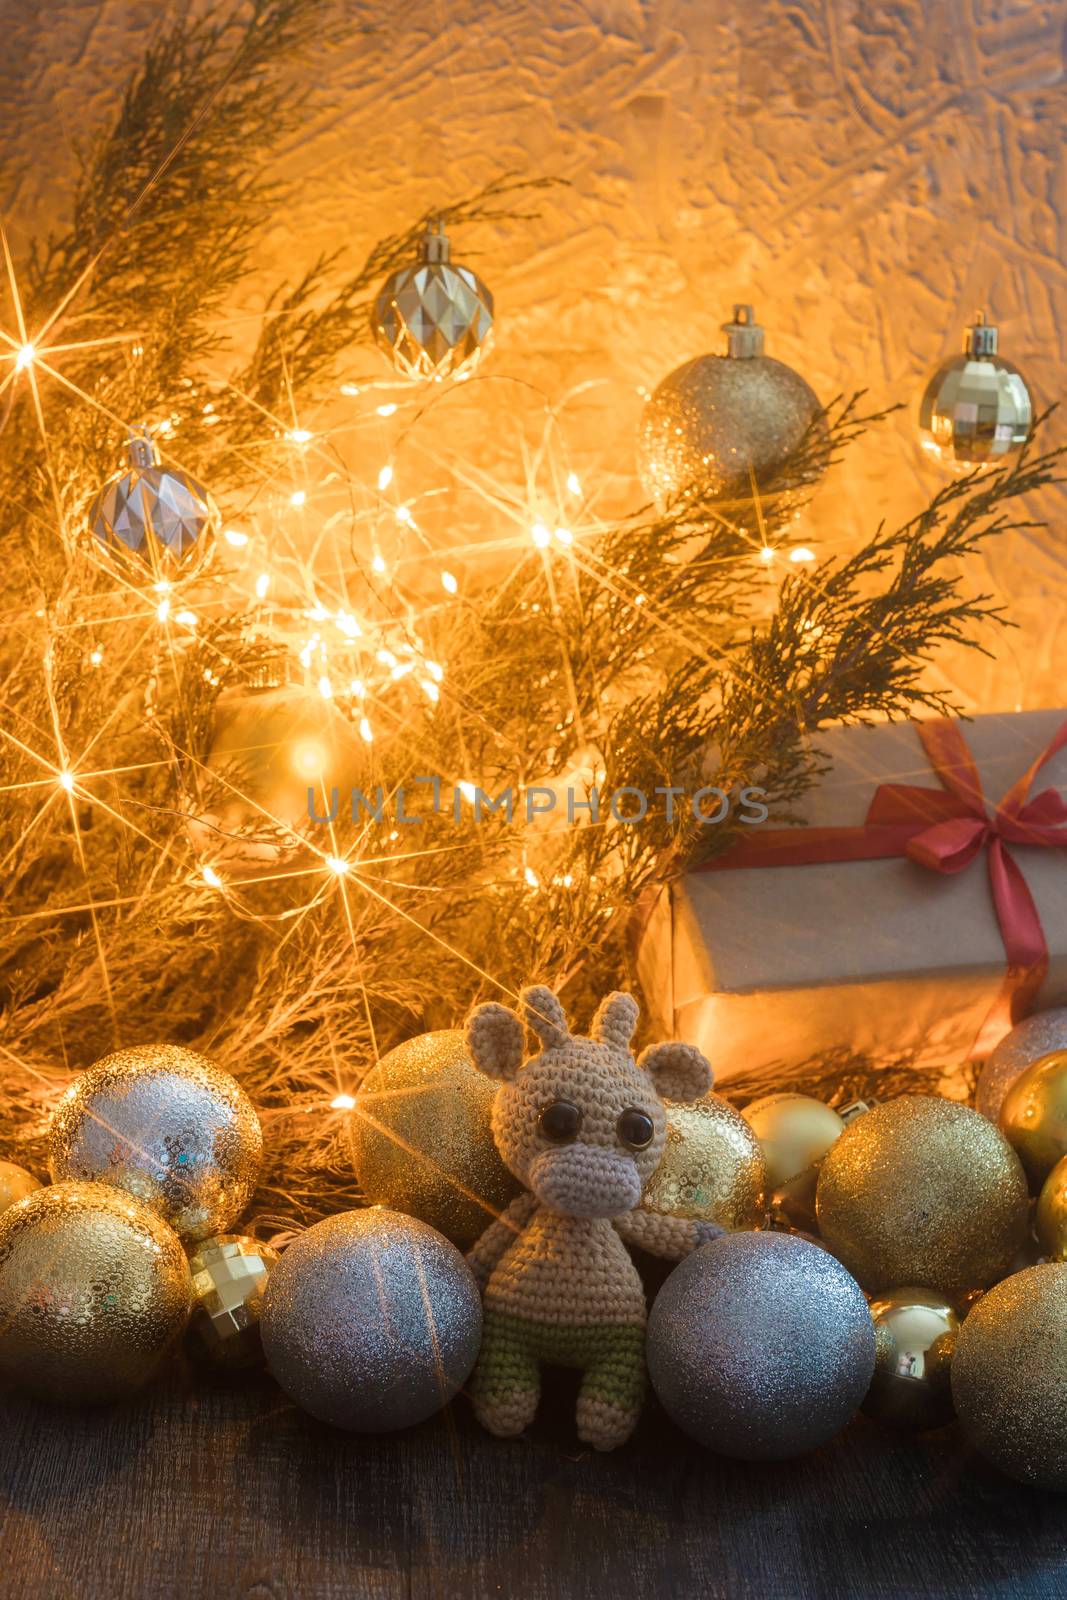 New year's holiday composition with gift box, toy bull, and garland decor by galinasharapova